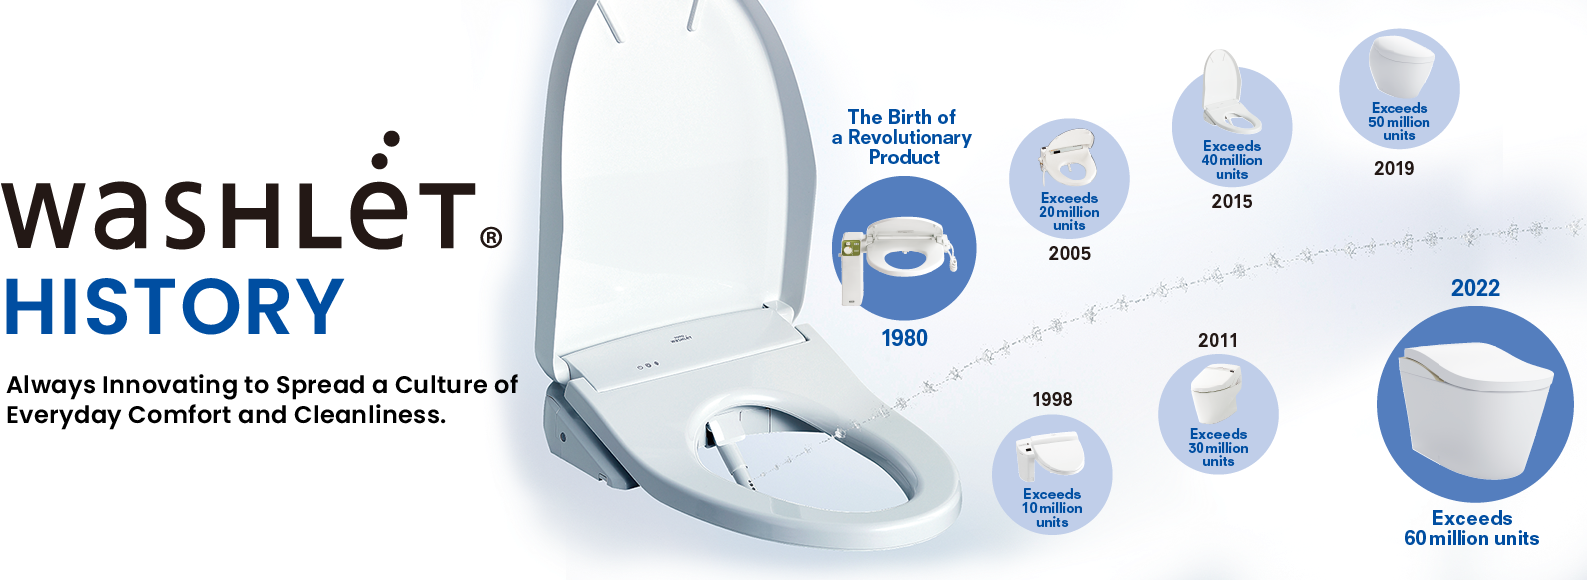 washlet HISTORY.Always Innovationg to Spread a Culture of Everyday Comfort and Cleanliness.